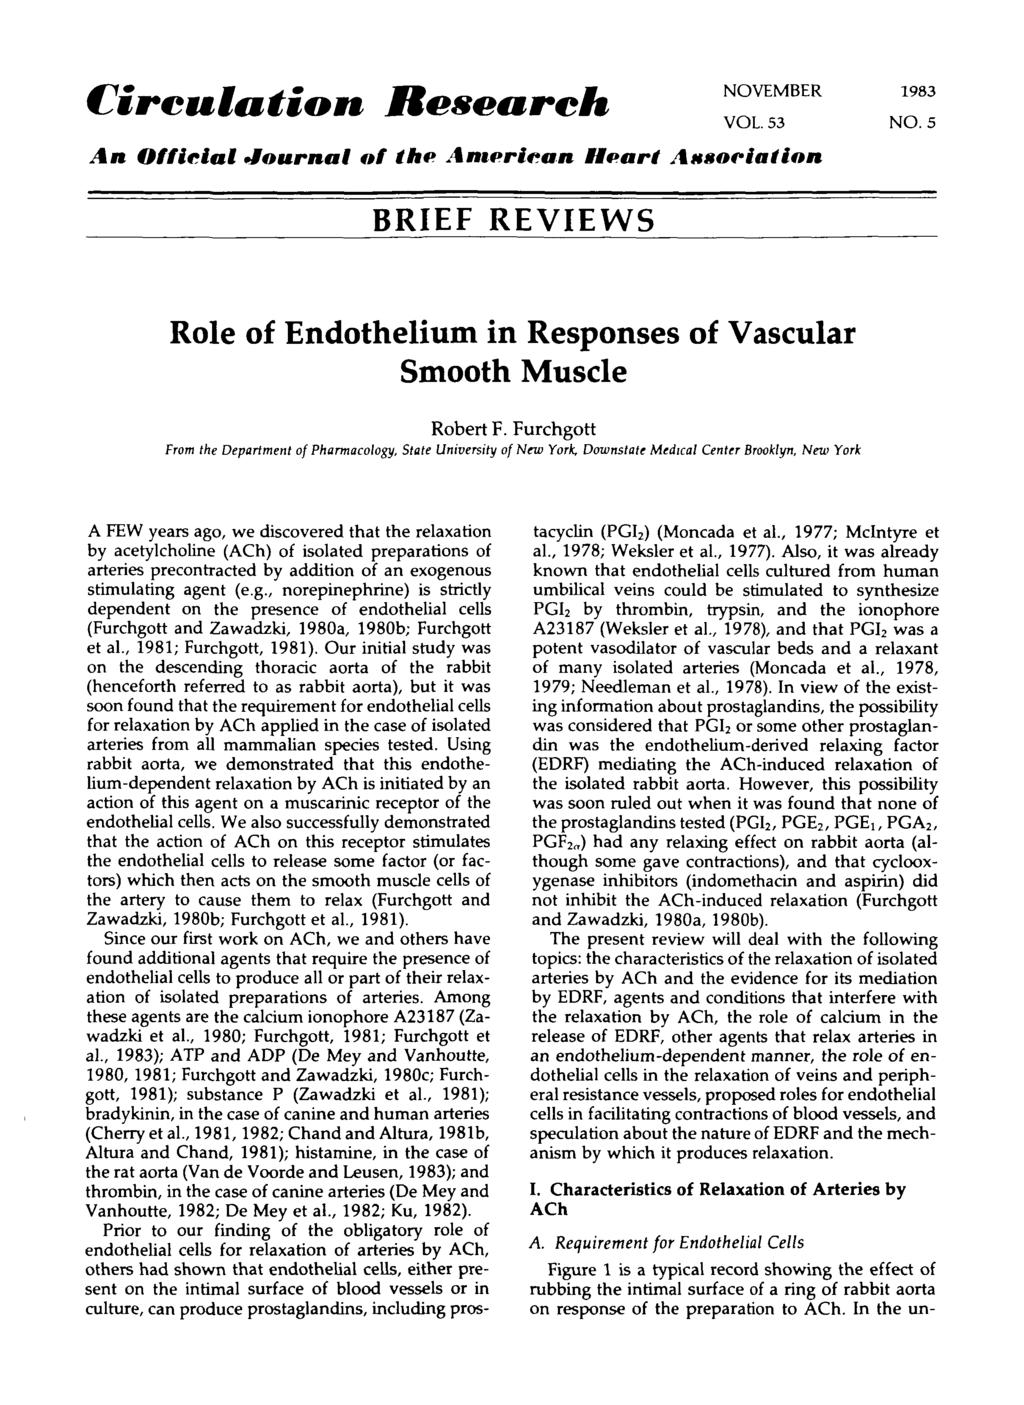 Circulation Research An Official Journal of the American Heart Atmooia/ion BRIEF REVIEWS NOVEMBER 1983 VOL. 53 NO. 5 Role of Endothelium in Responses of Vascular Smooth Muscle Robert F.